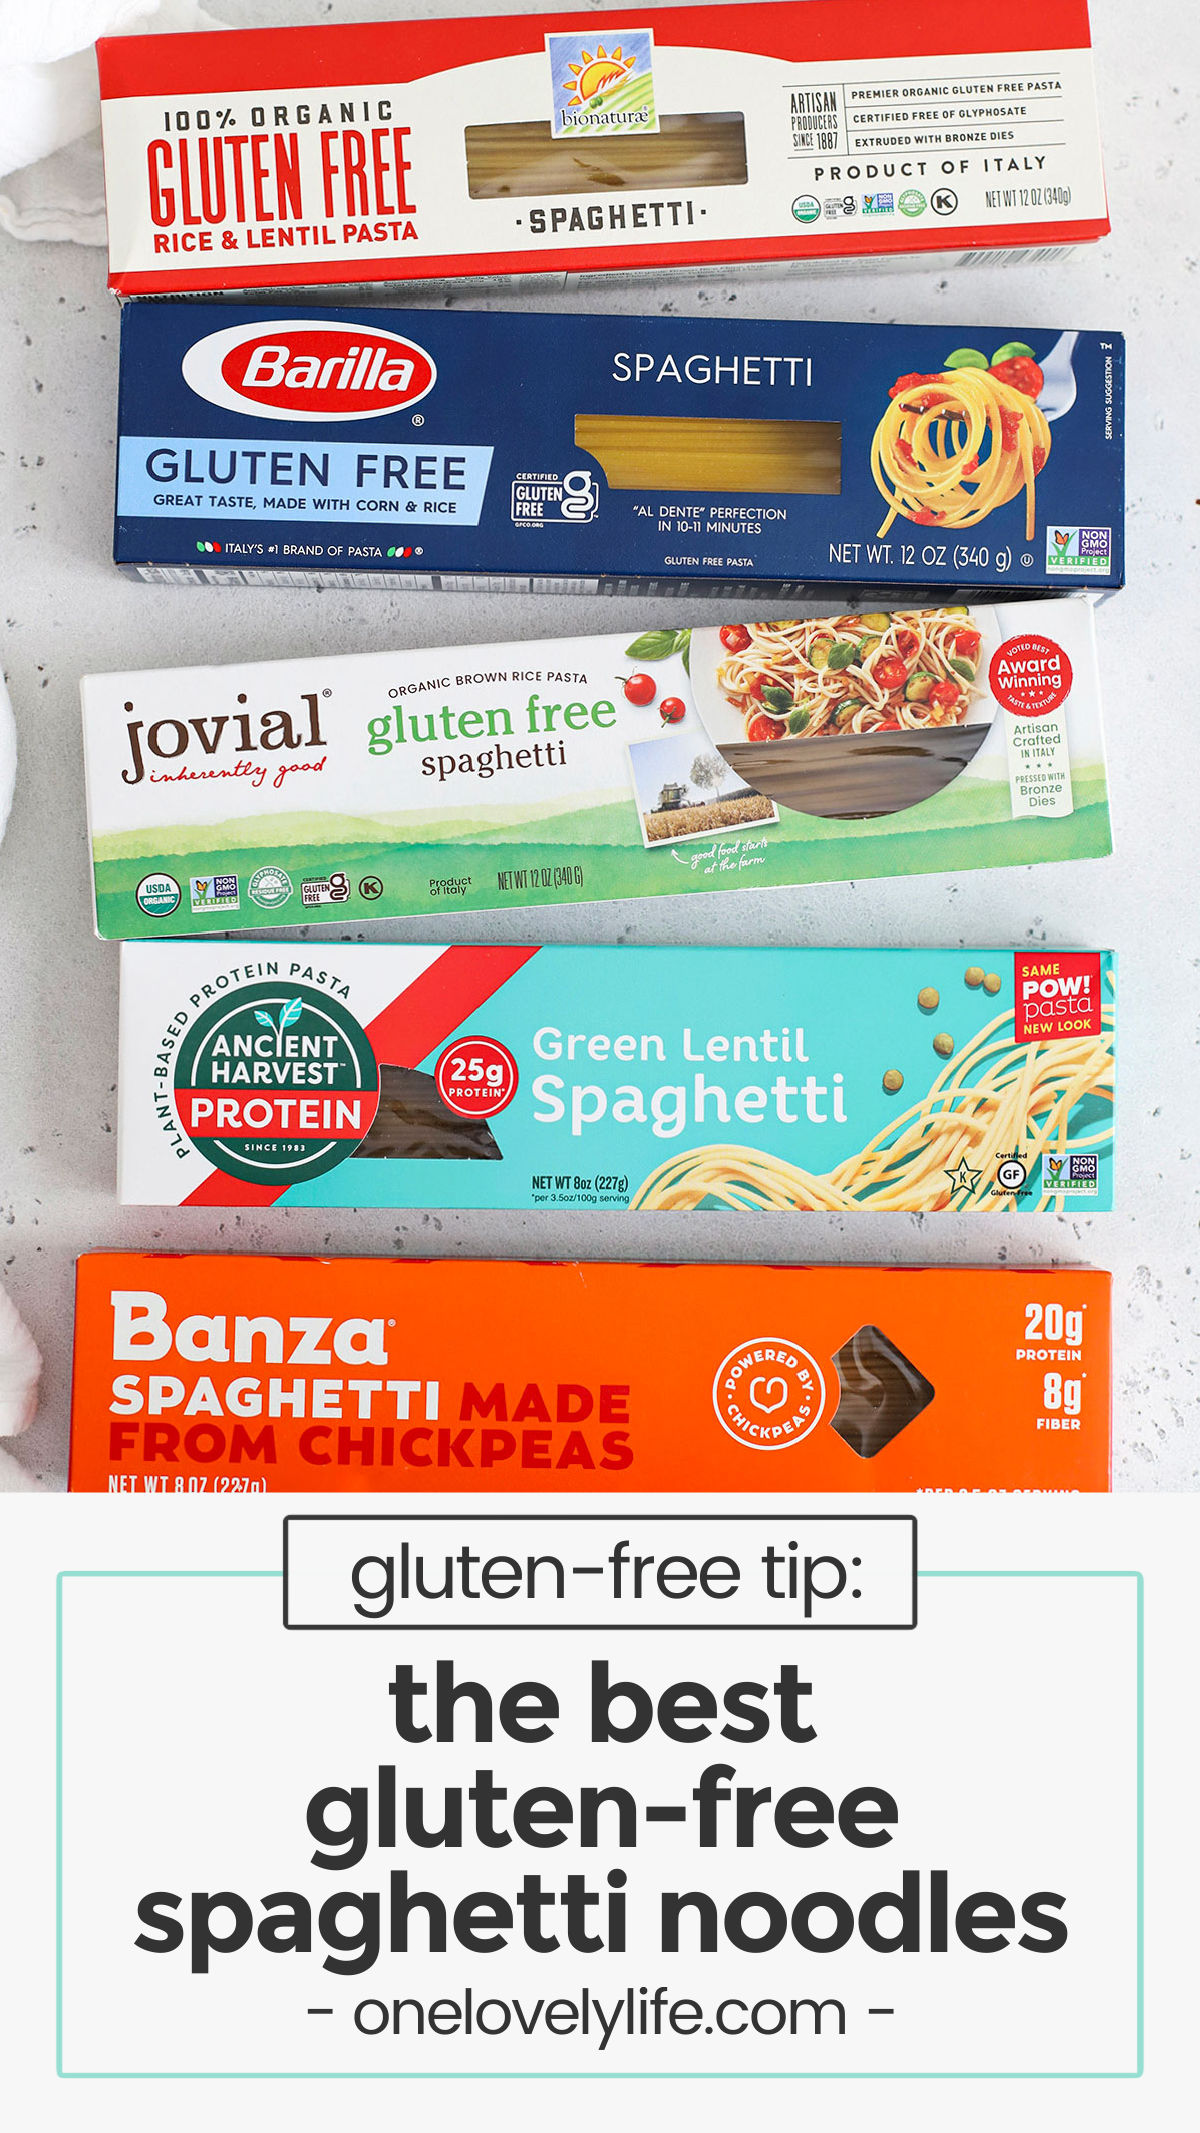 Wondering which brands of spaghetti noodles are gluten-free? We're sharing 5 popular brands, plus which gluten-free spaghetti is the best! / gluten free spaghetti brands / the best gluten free spaghetti / gluten free spaghetti pasta brands / gluten free spaghetti noodles brands / best gluten free spaghetti options / best gluten free pasta